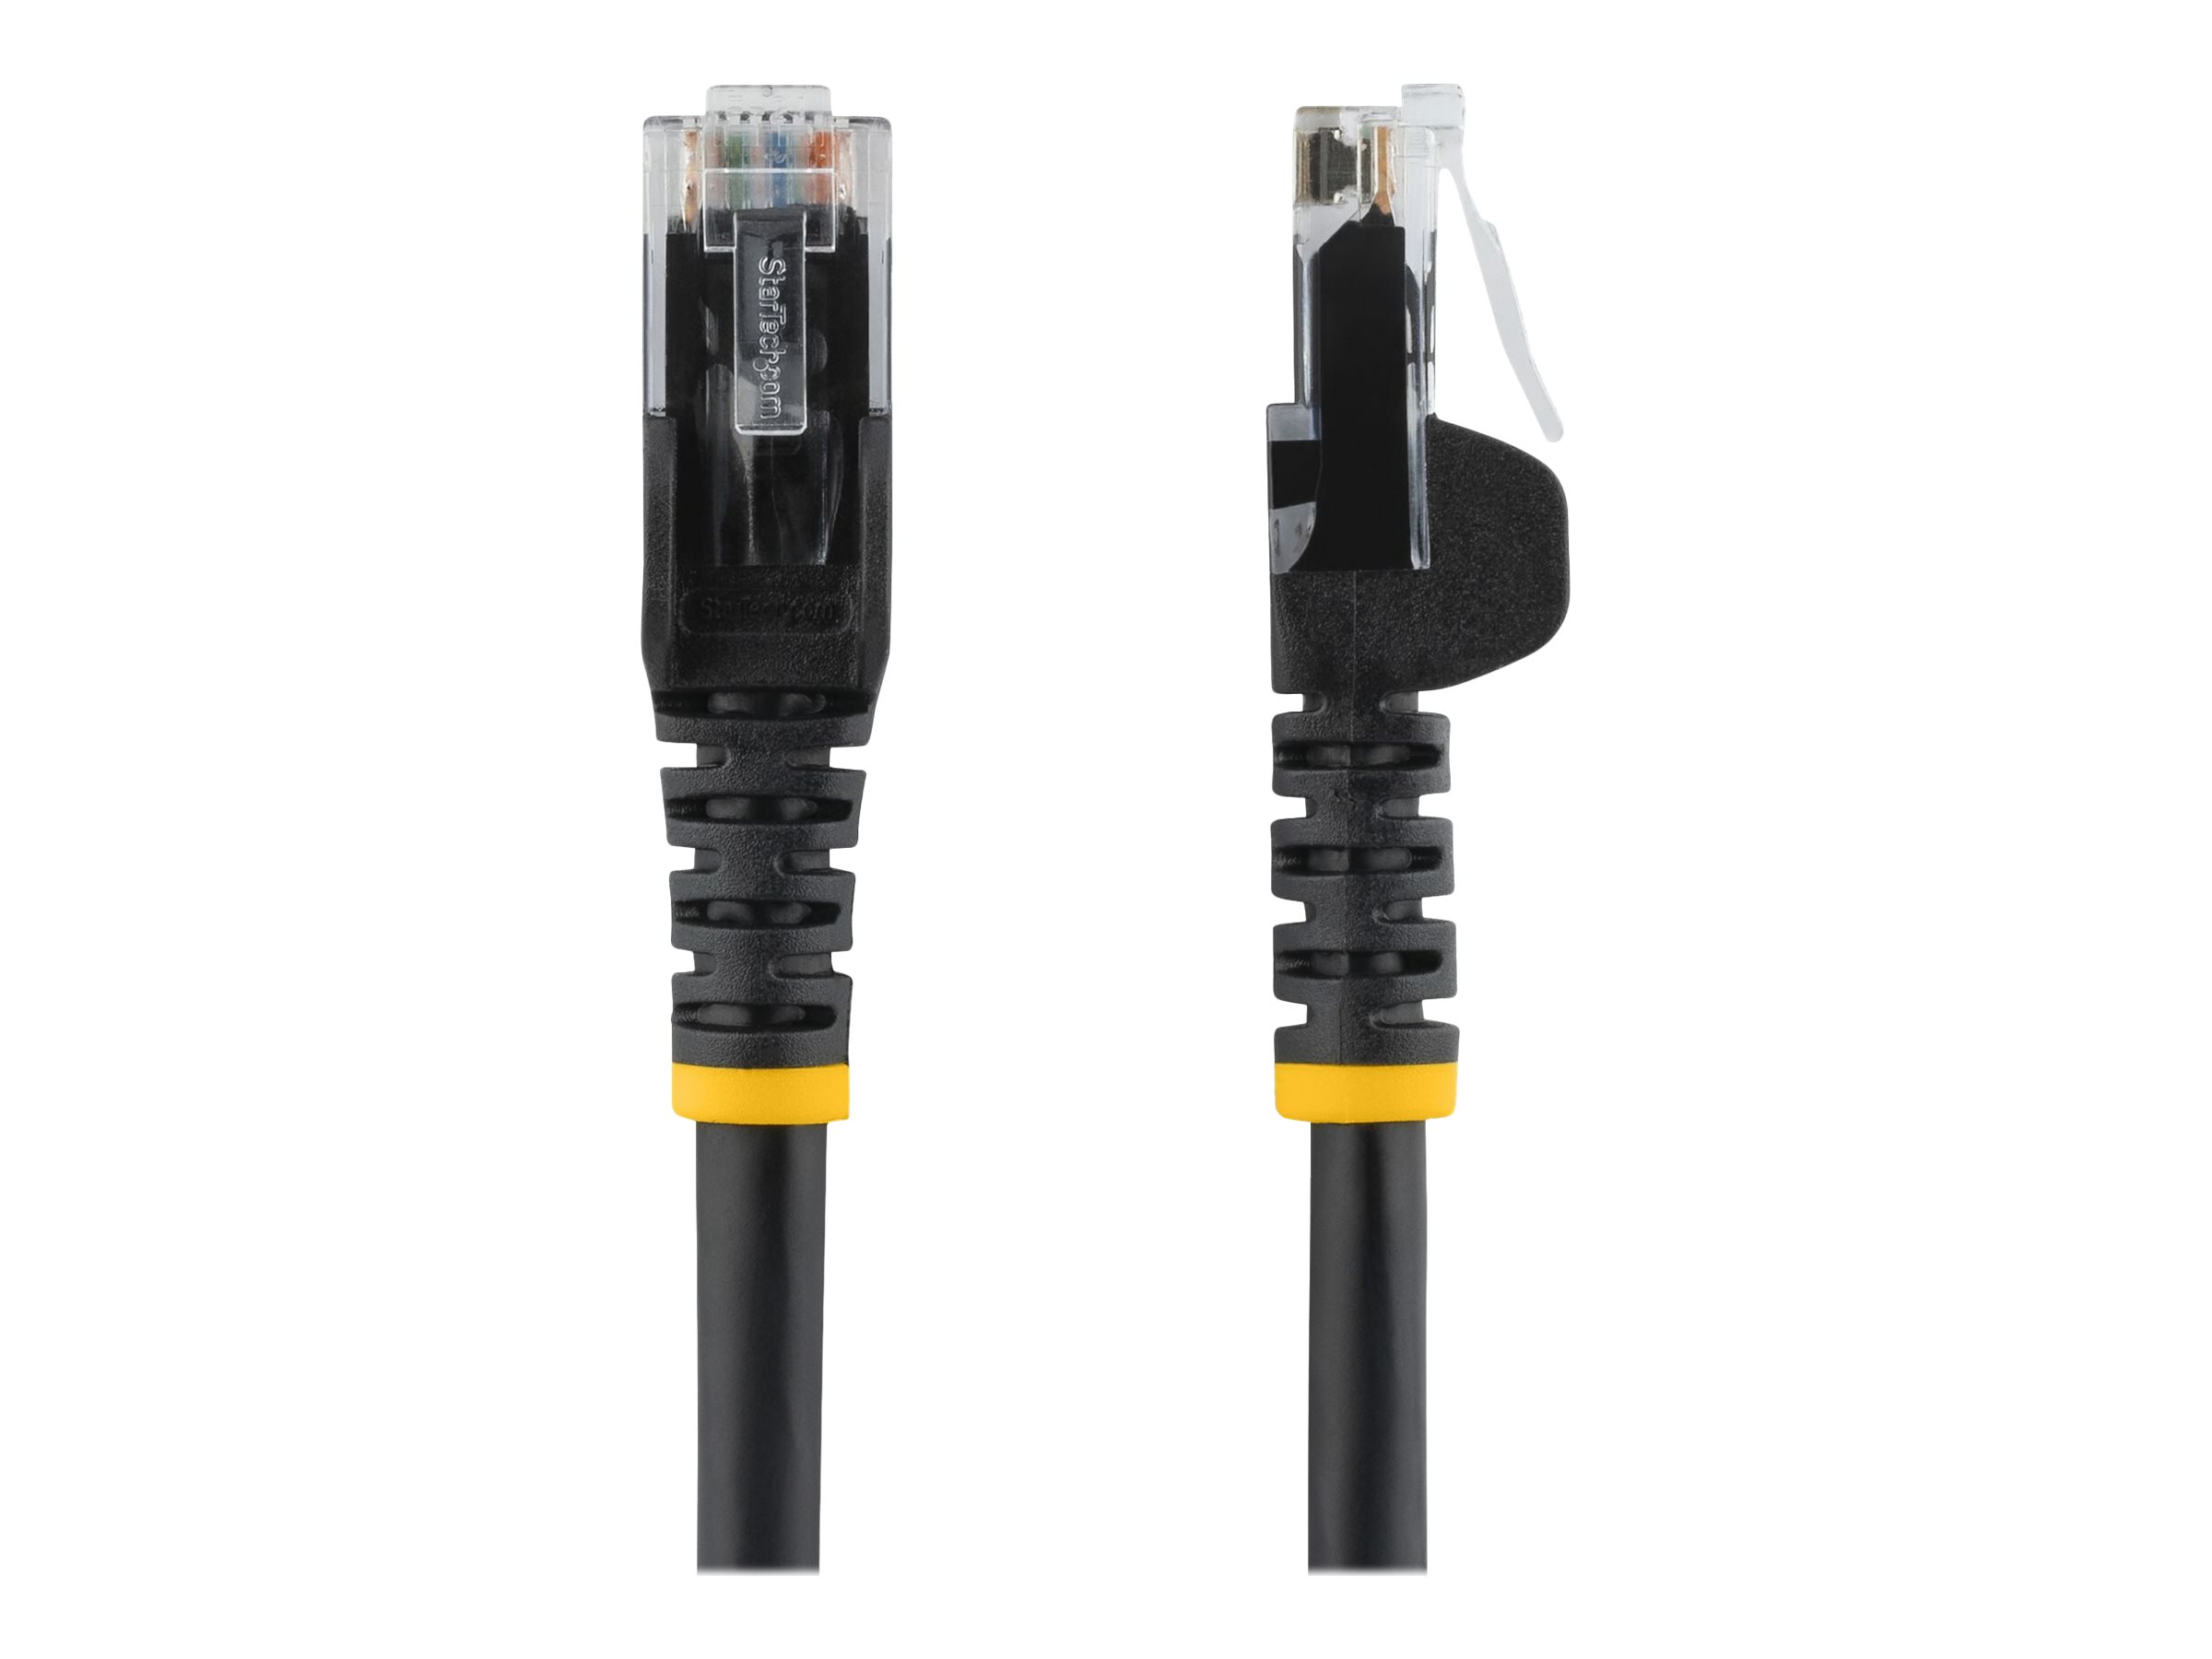 StarTech.com 6ft CAT6 Ethernet Cable, 10 Gigabit Snagless RJ45 650MHz 100W PoE Patch Cord, CAT 6 10GbE UTP Network Cable w/Strain Relief, Black, Fluke Tested/Wiring is UL Certified/TIA